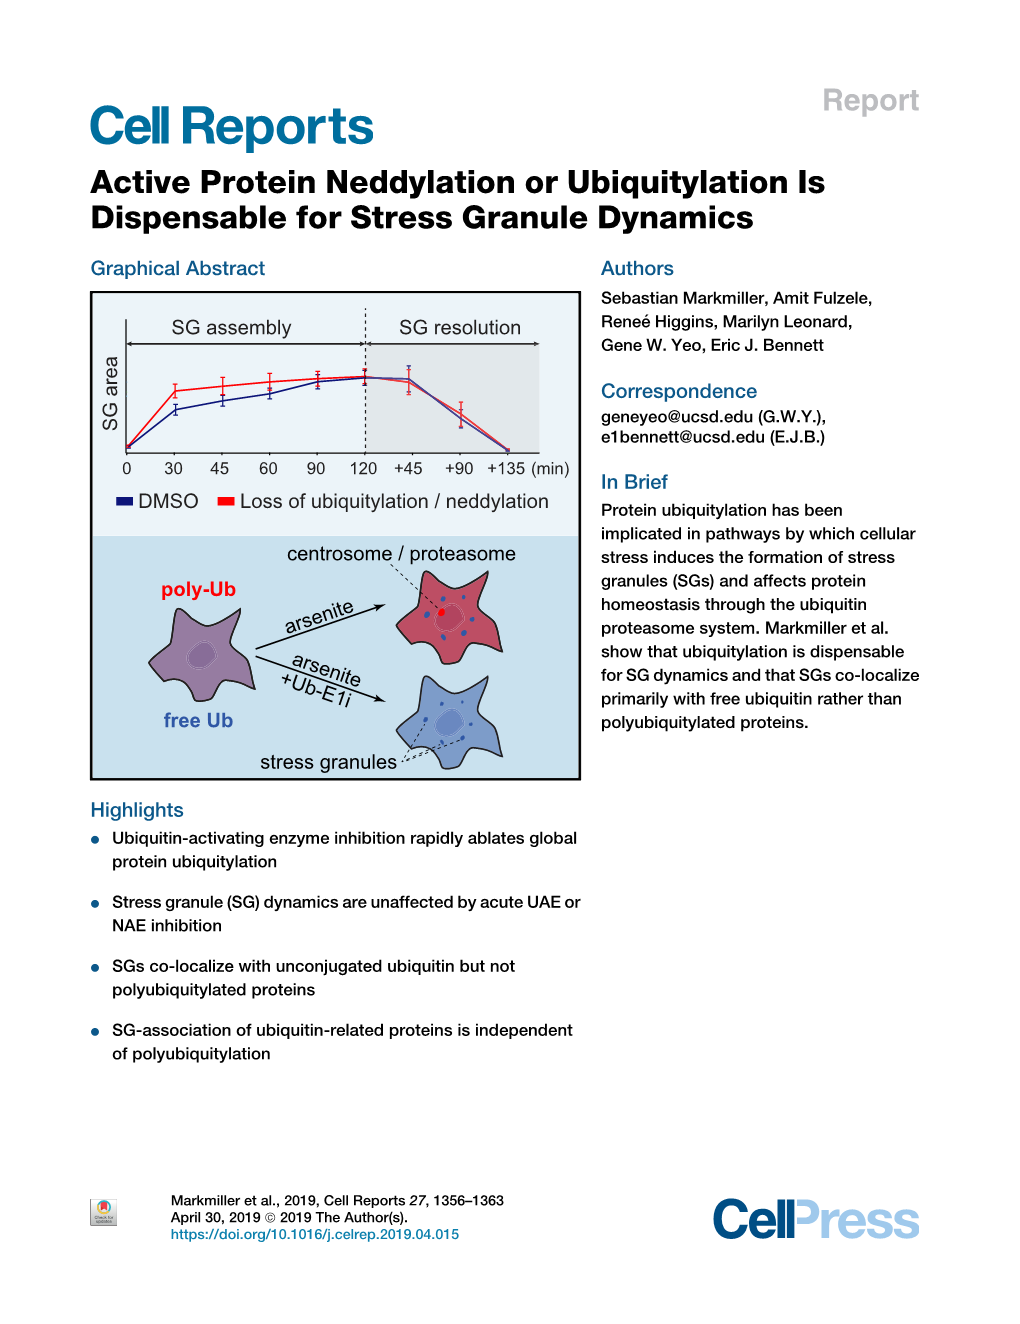 Active Protein Neddylation Or Ubiquitylation Is Dispensable for Stress Granule Dynamics